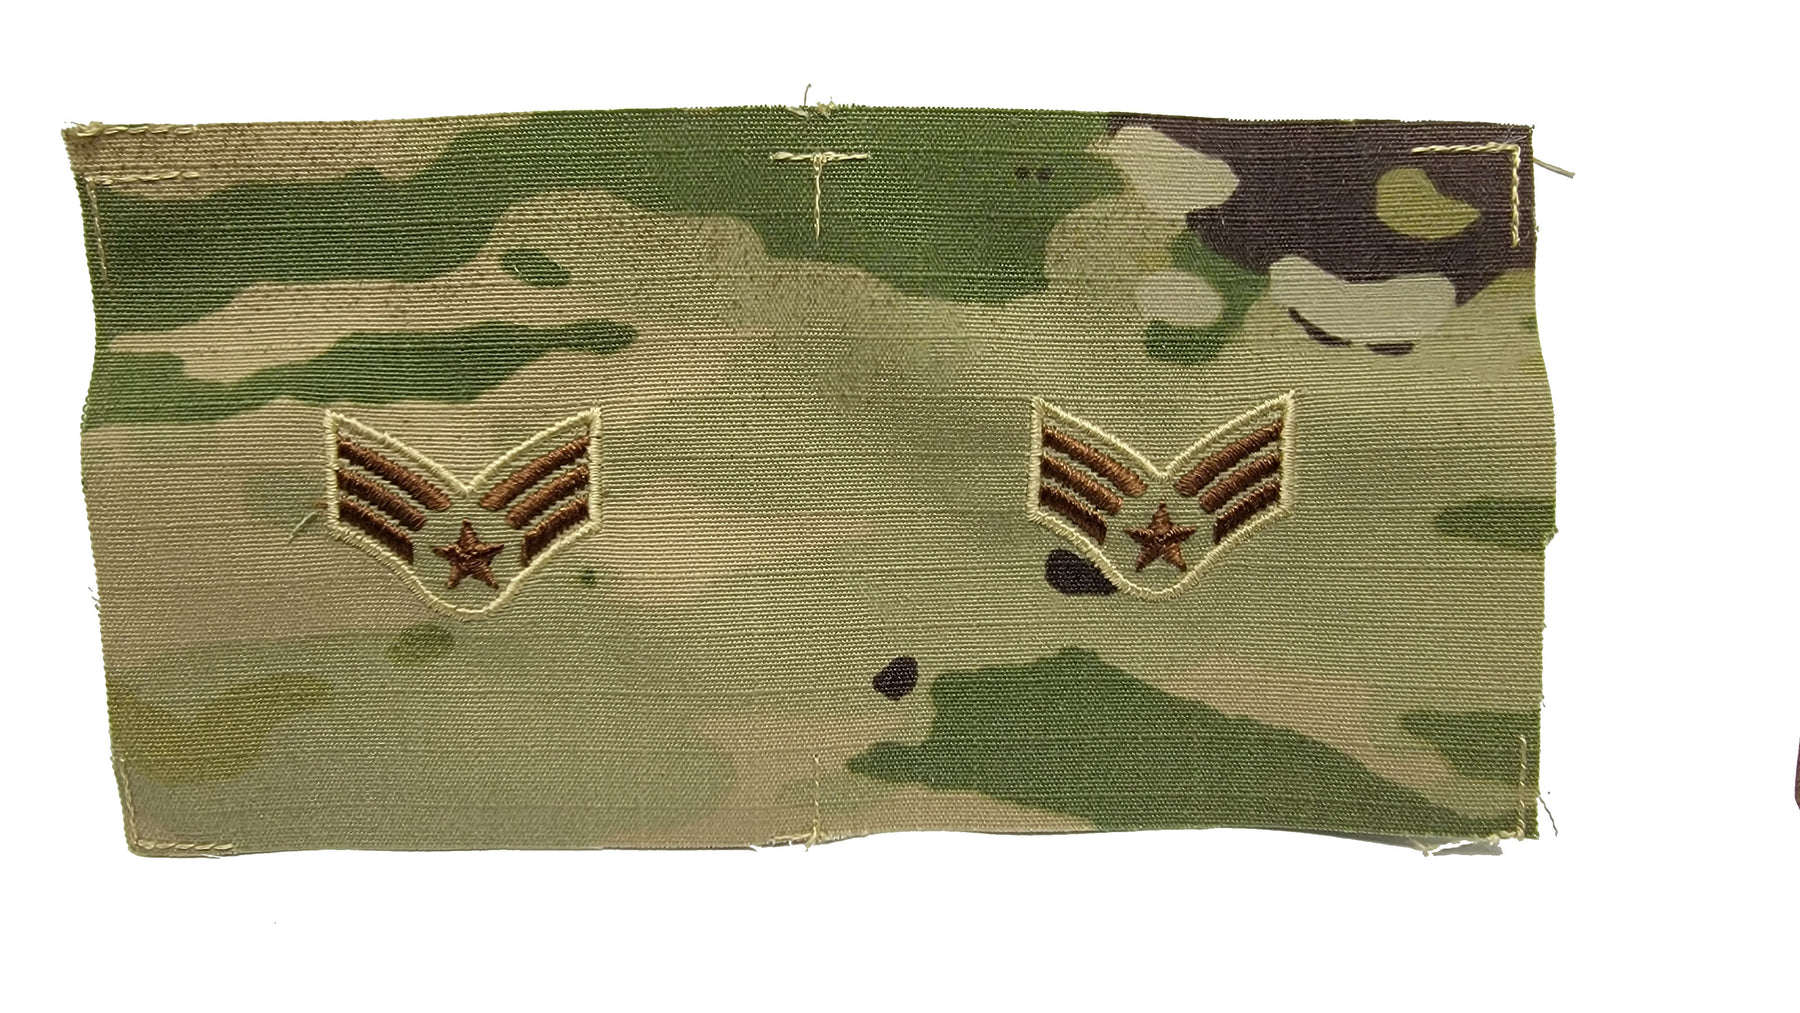 CLEARANCE - U.S. Air Force OCP SEW ON in Pairs - 7 COLOR OCP